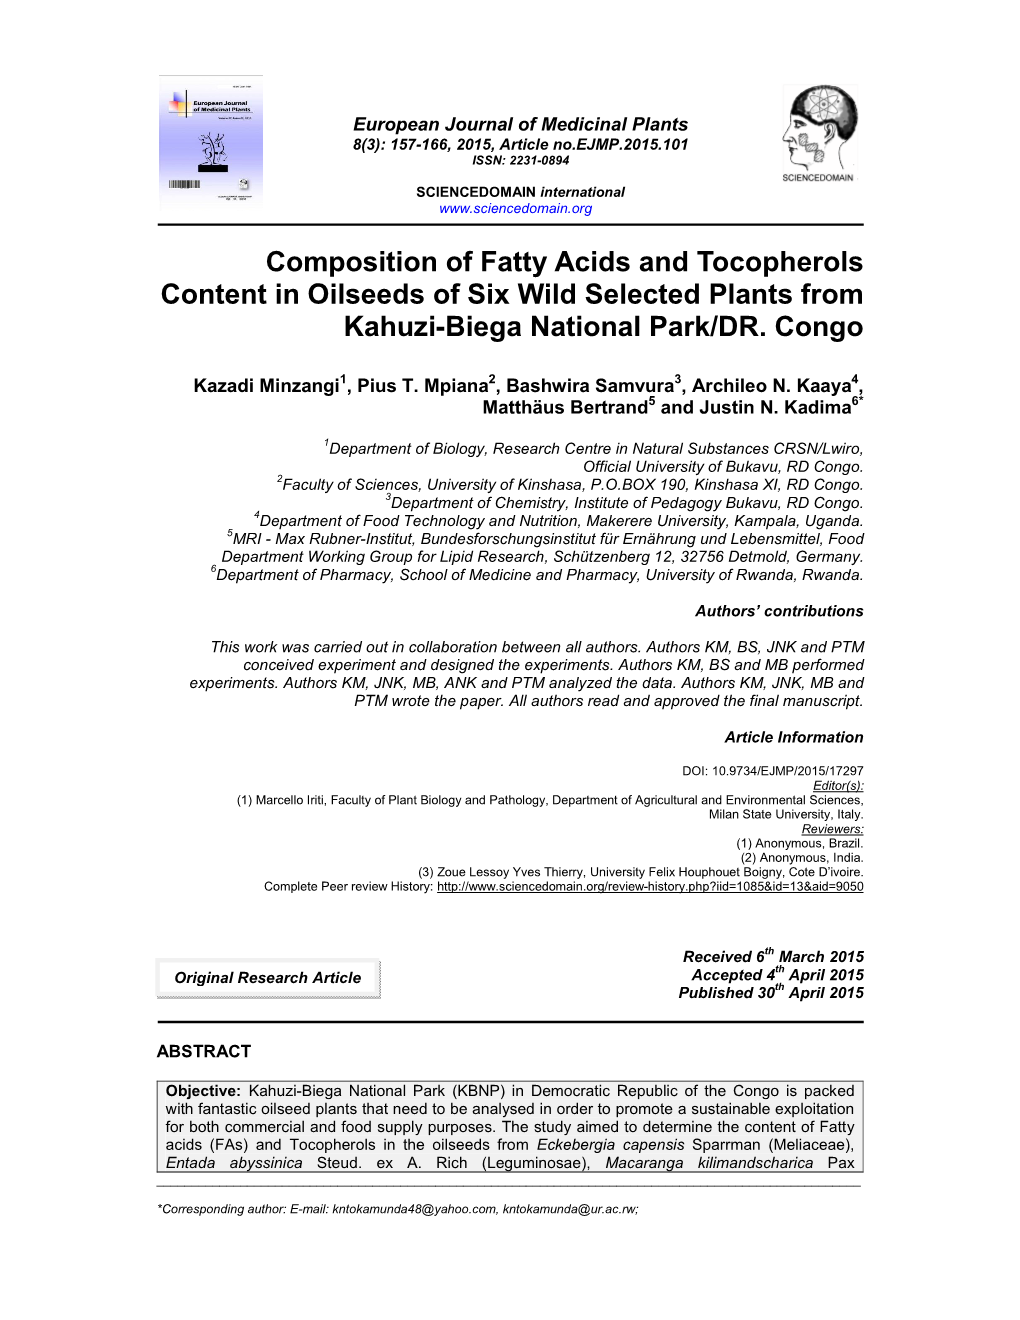 Composition of Fatty Acids and Tocopherols Content in Oilseeds of Six Wild Selected Plants from Kahuzi-Biega National Park/DR